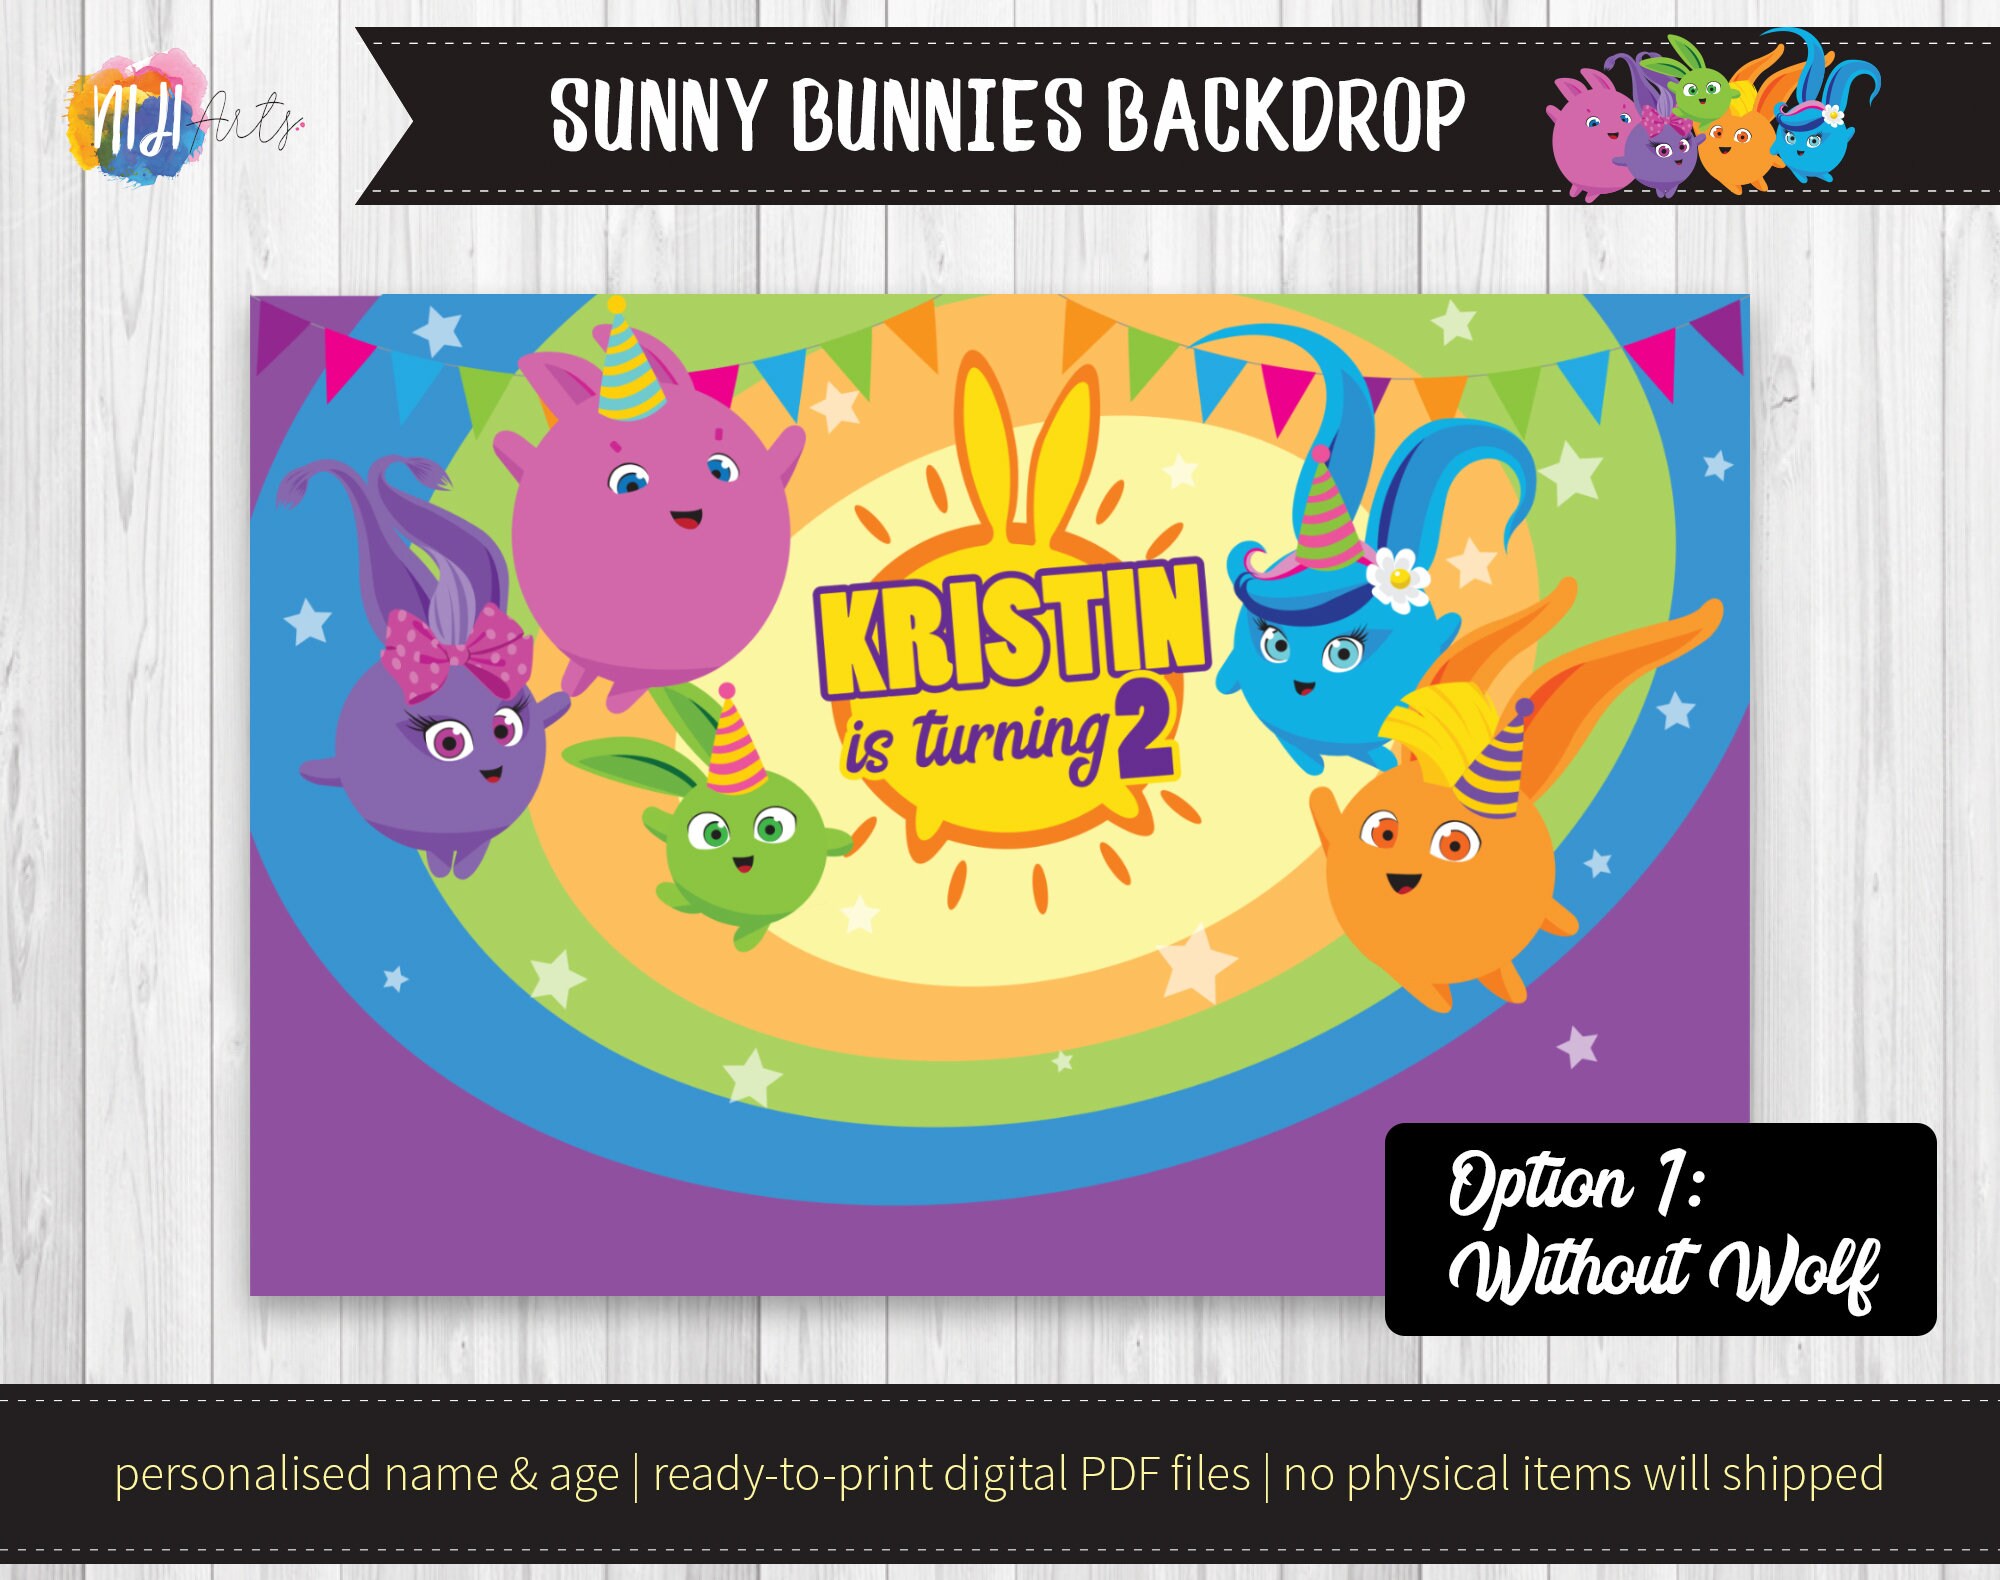 SUNNY BUNNIES BIRTHDAY EVENT BANNER POSTER PERSONALISED ANY NAME AGE TEXT